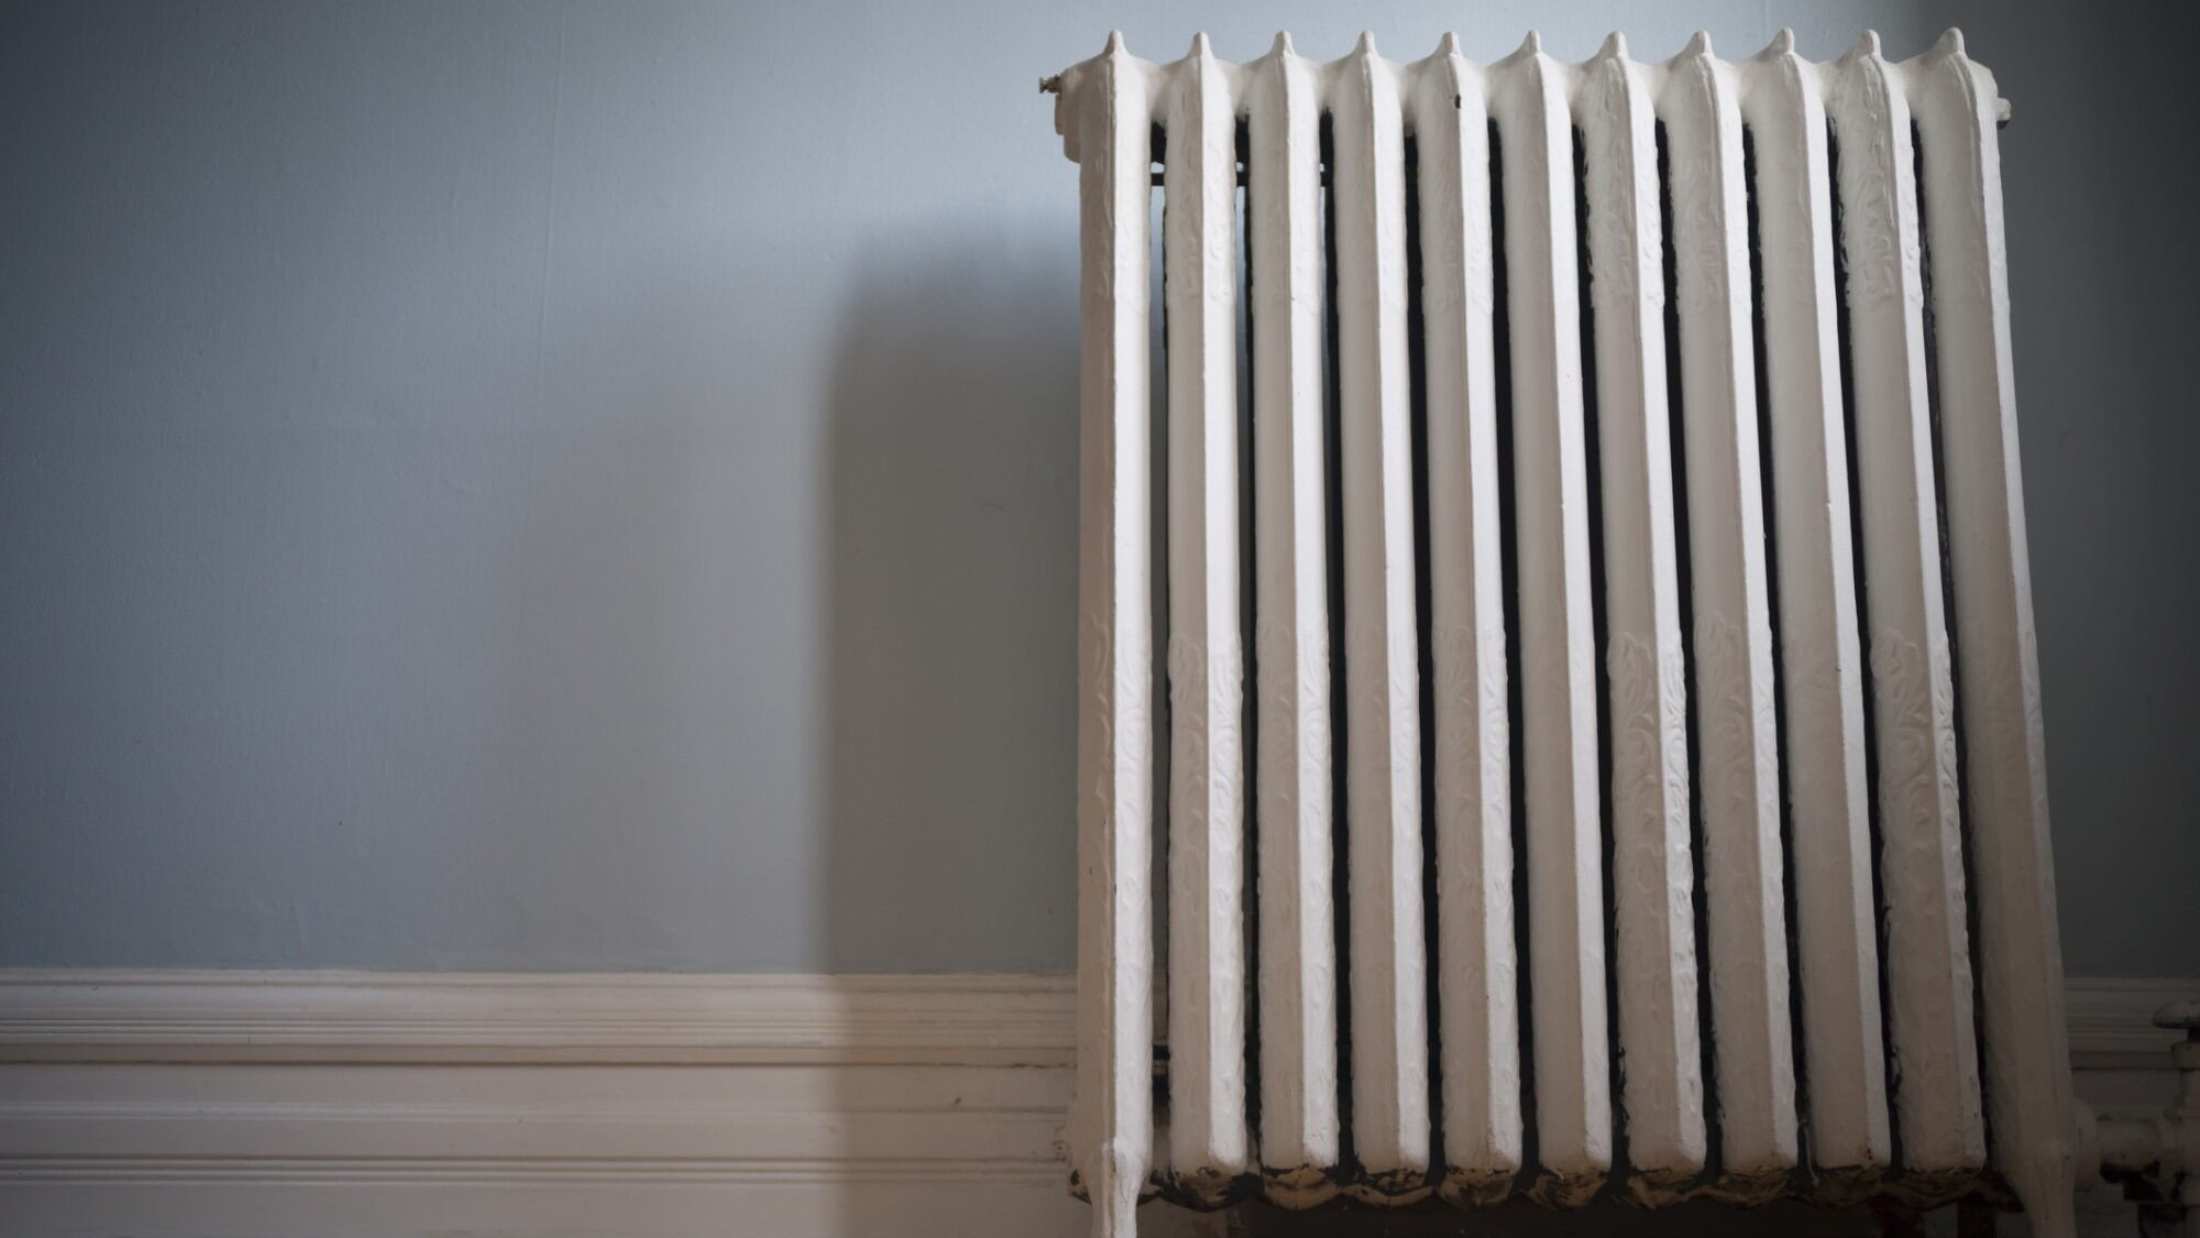 Old cast iron radiator at surface level